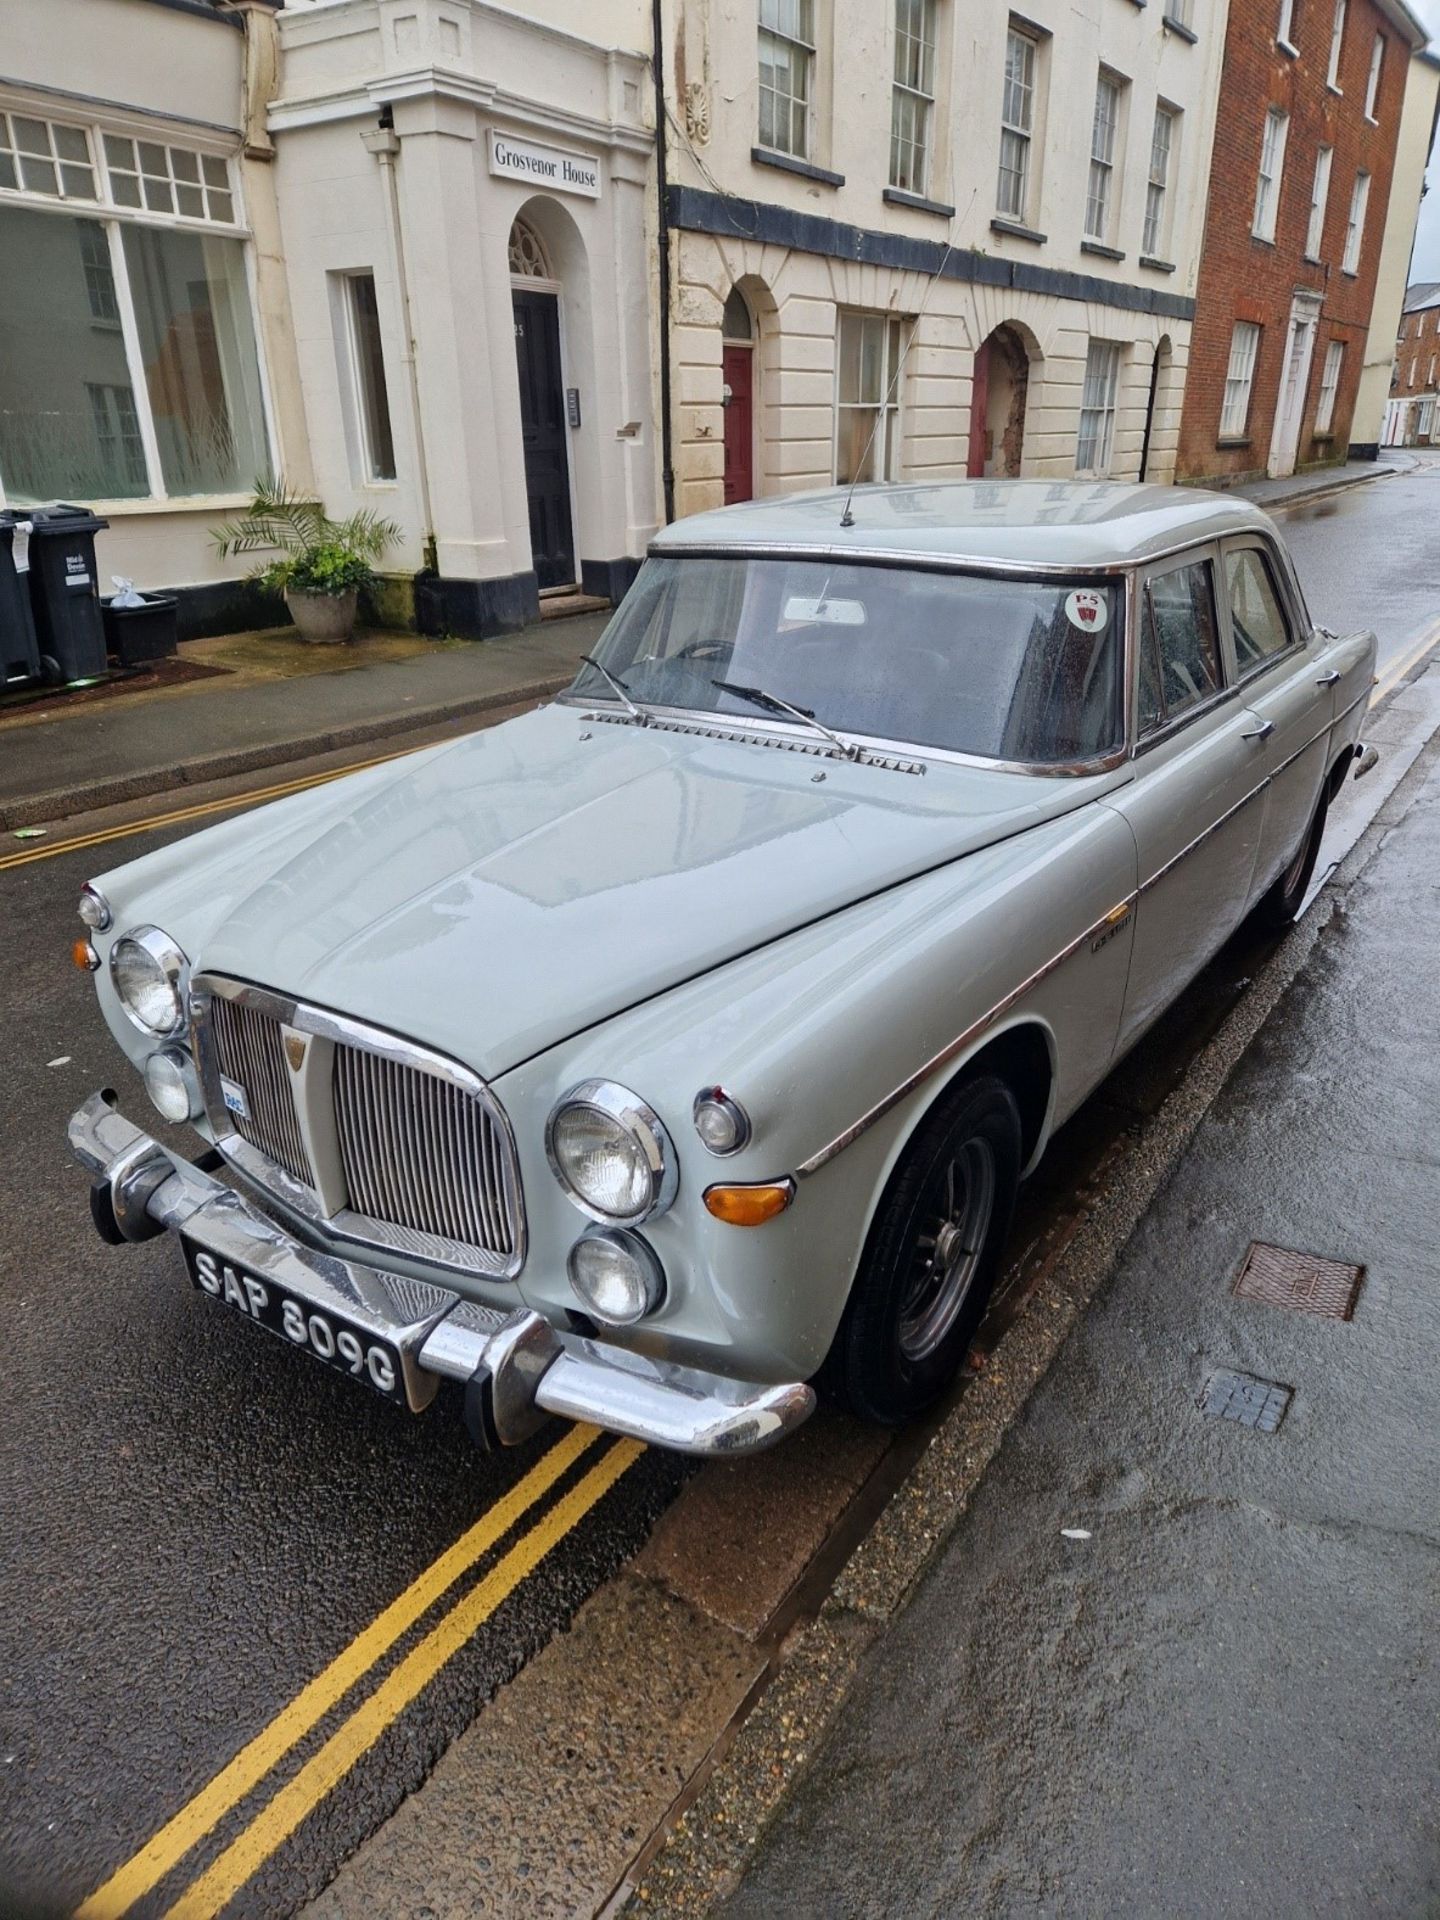 1969 Rover P5B Saloon Registration number SAP 809G Chassis number 84003266B Engine number